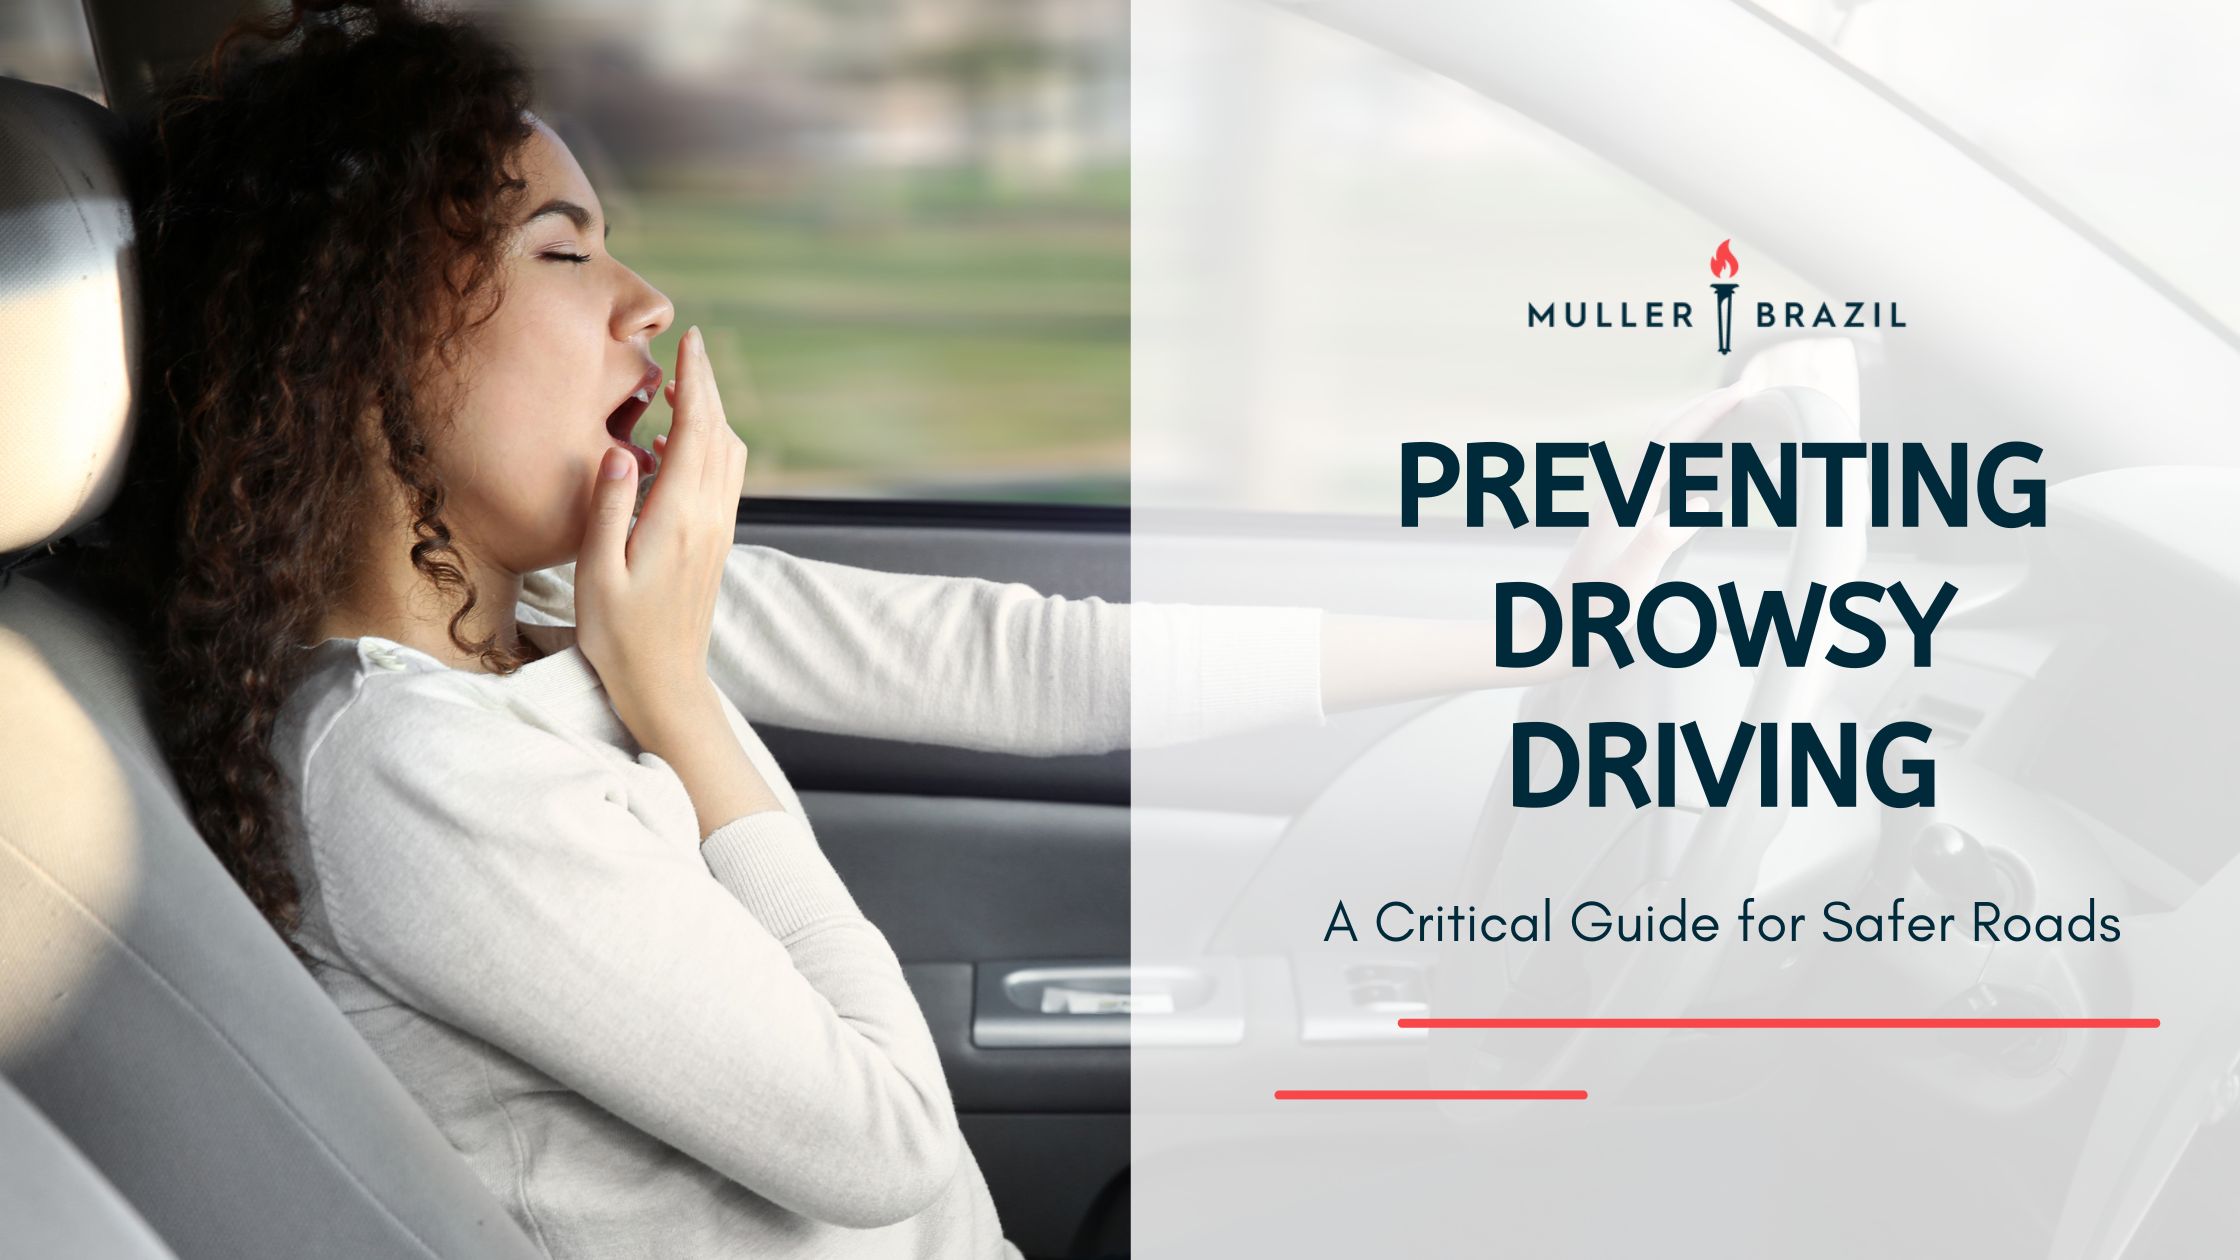 An image featuring a young woman yawning with her hand covering her mouth, signifying fatigue, as she sits in the driver seat of a car, illustrating the concept of drowsy driving. The right side of the image displays the text 